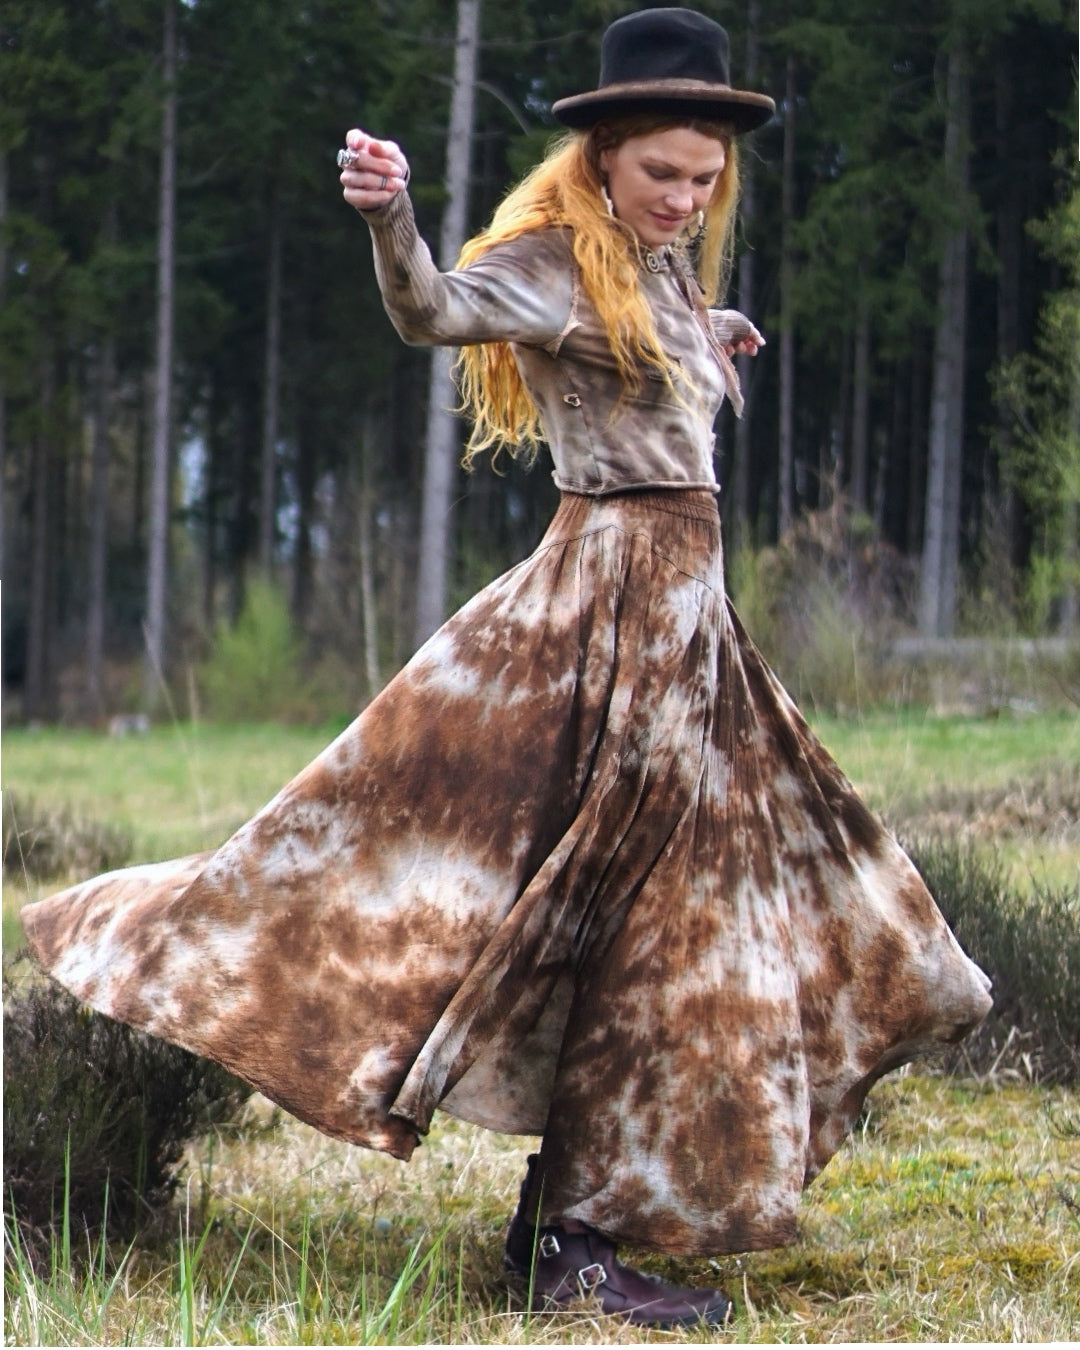 Maxi Skirt MTO - Forest Floor  (Sample Picture)